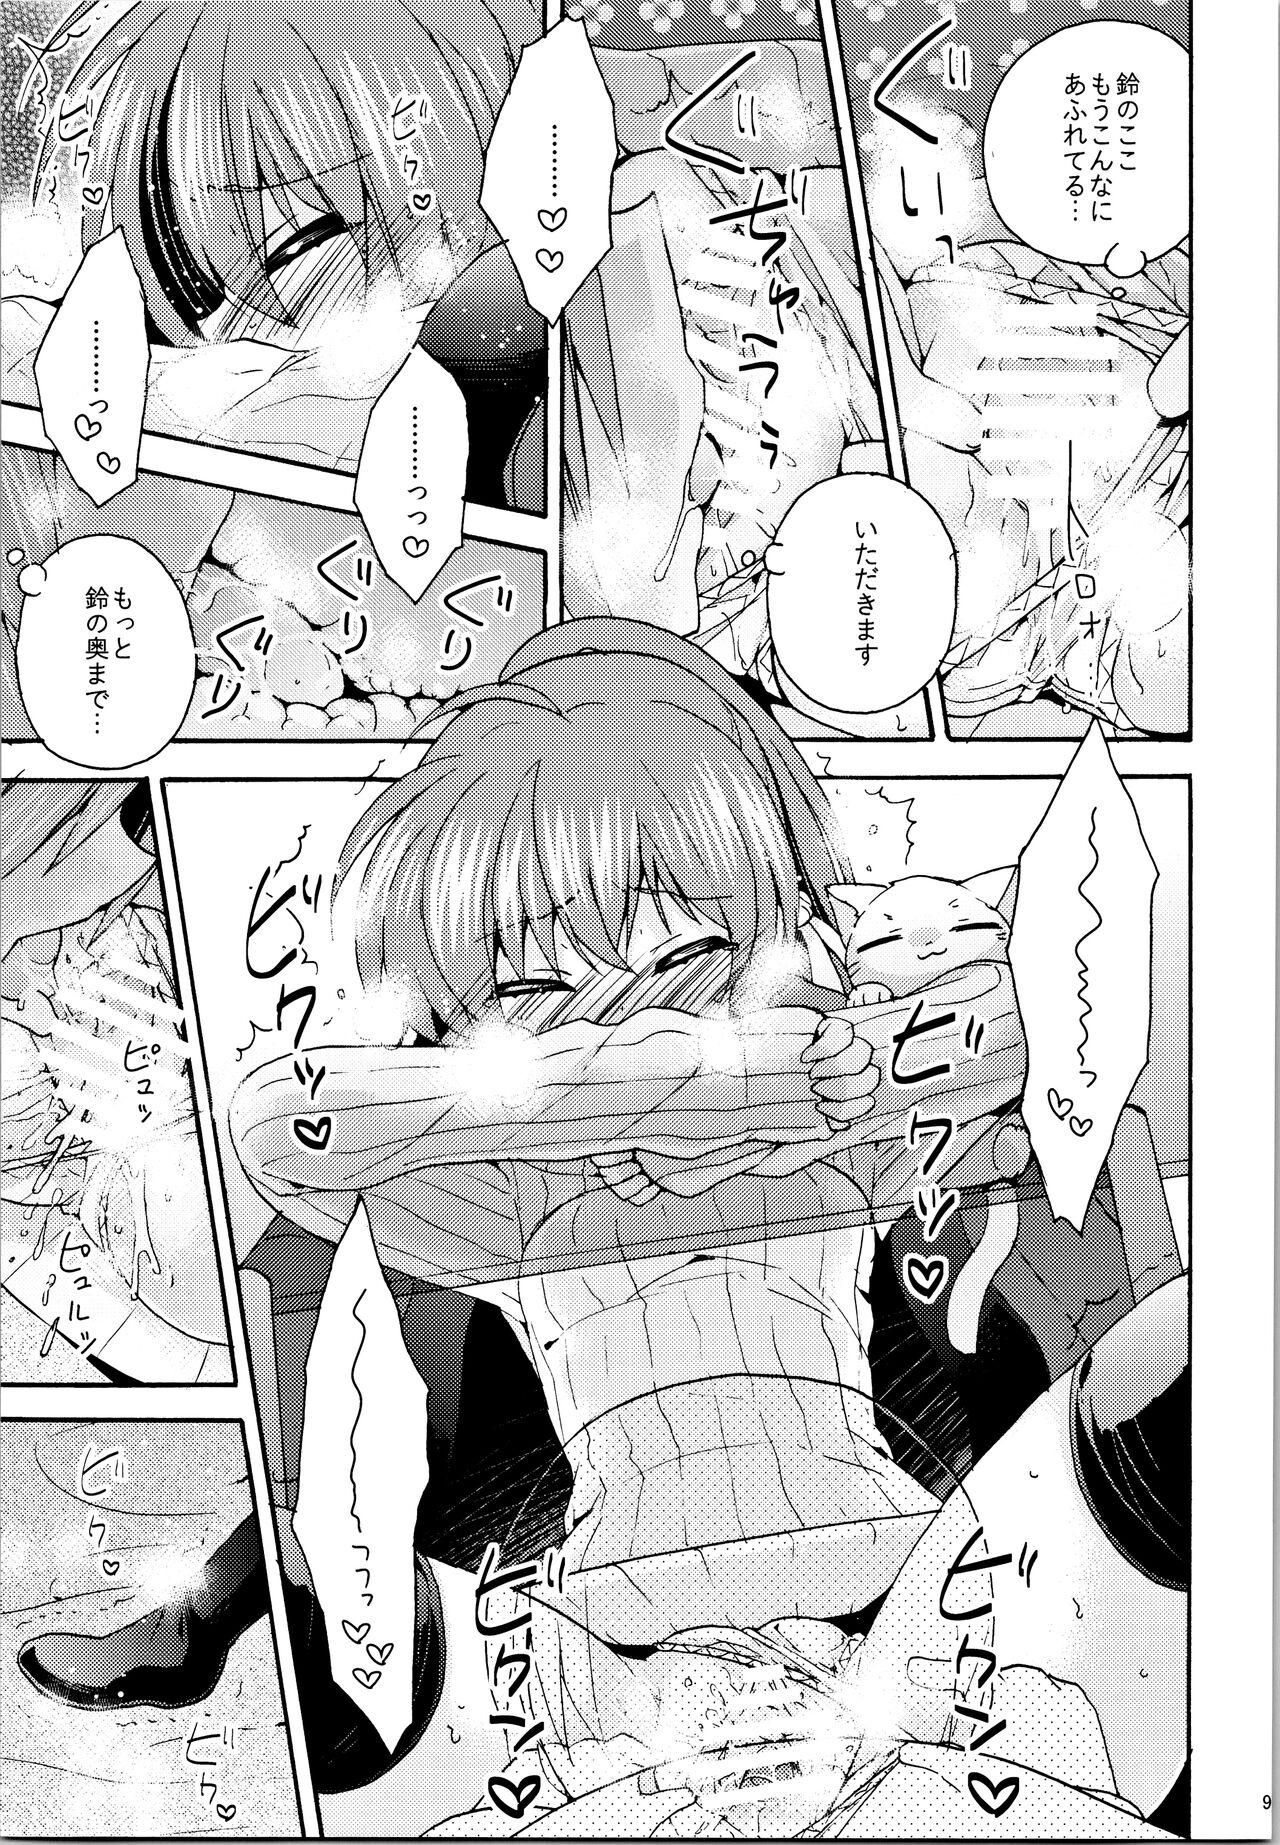 Exgirlfriend Just A Few More Nights - Little busters Amigo - Page 8